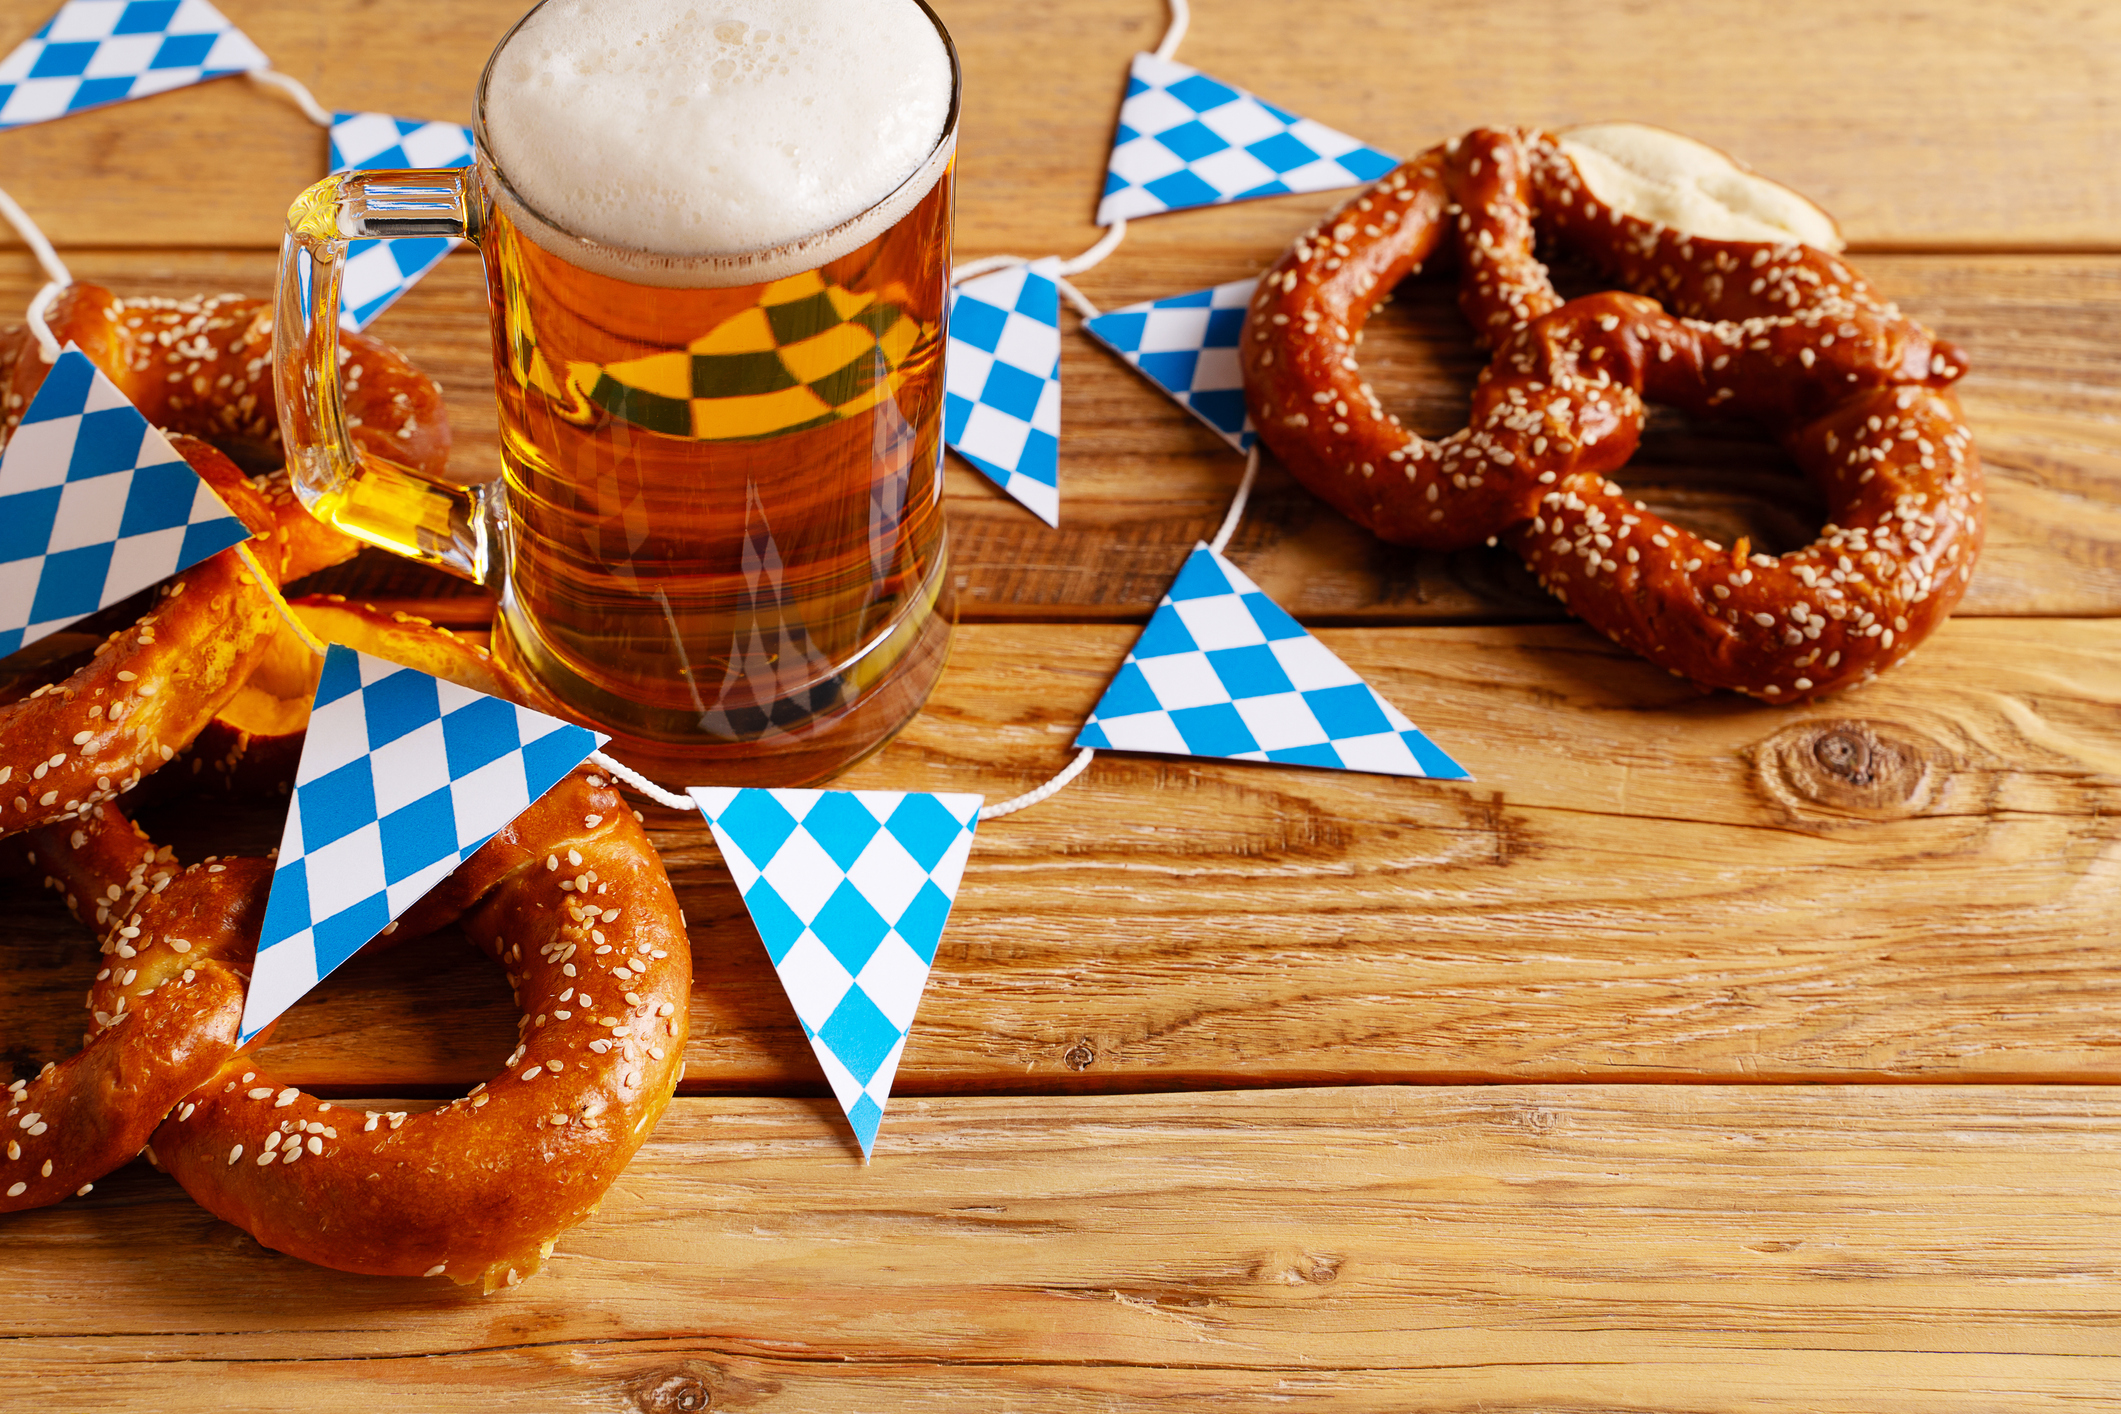 Consider celebrating Oktoberfest in Greenport this week on the North Fork